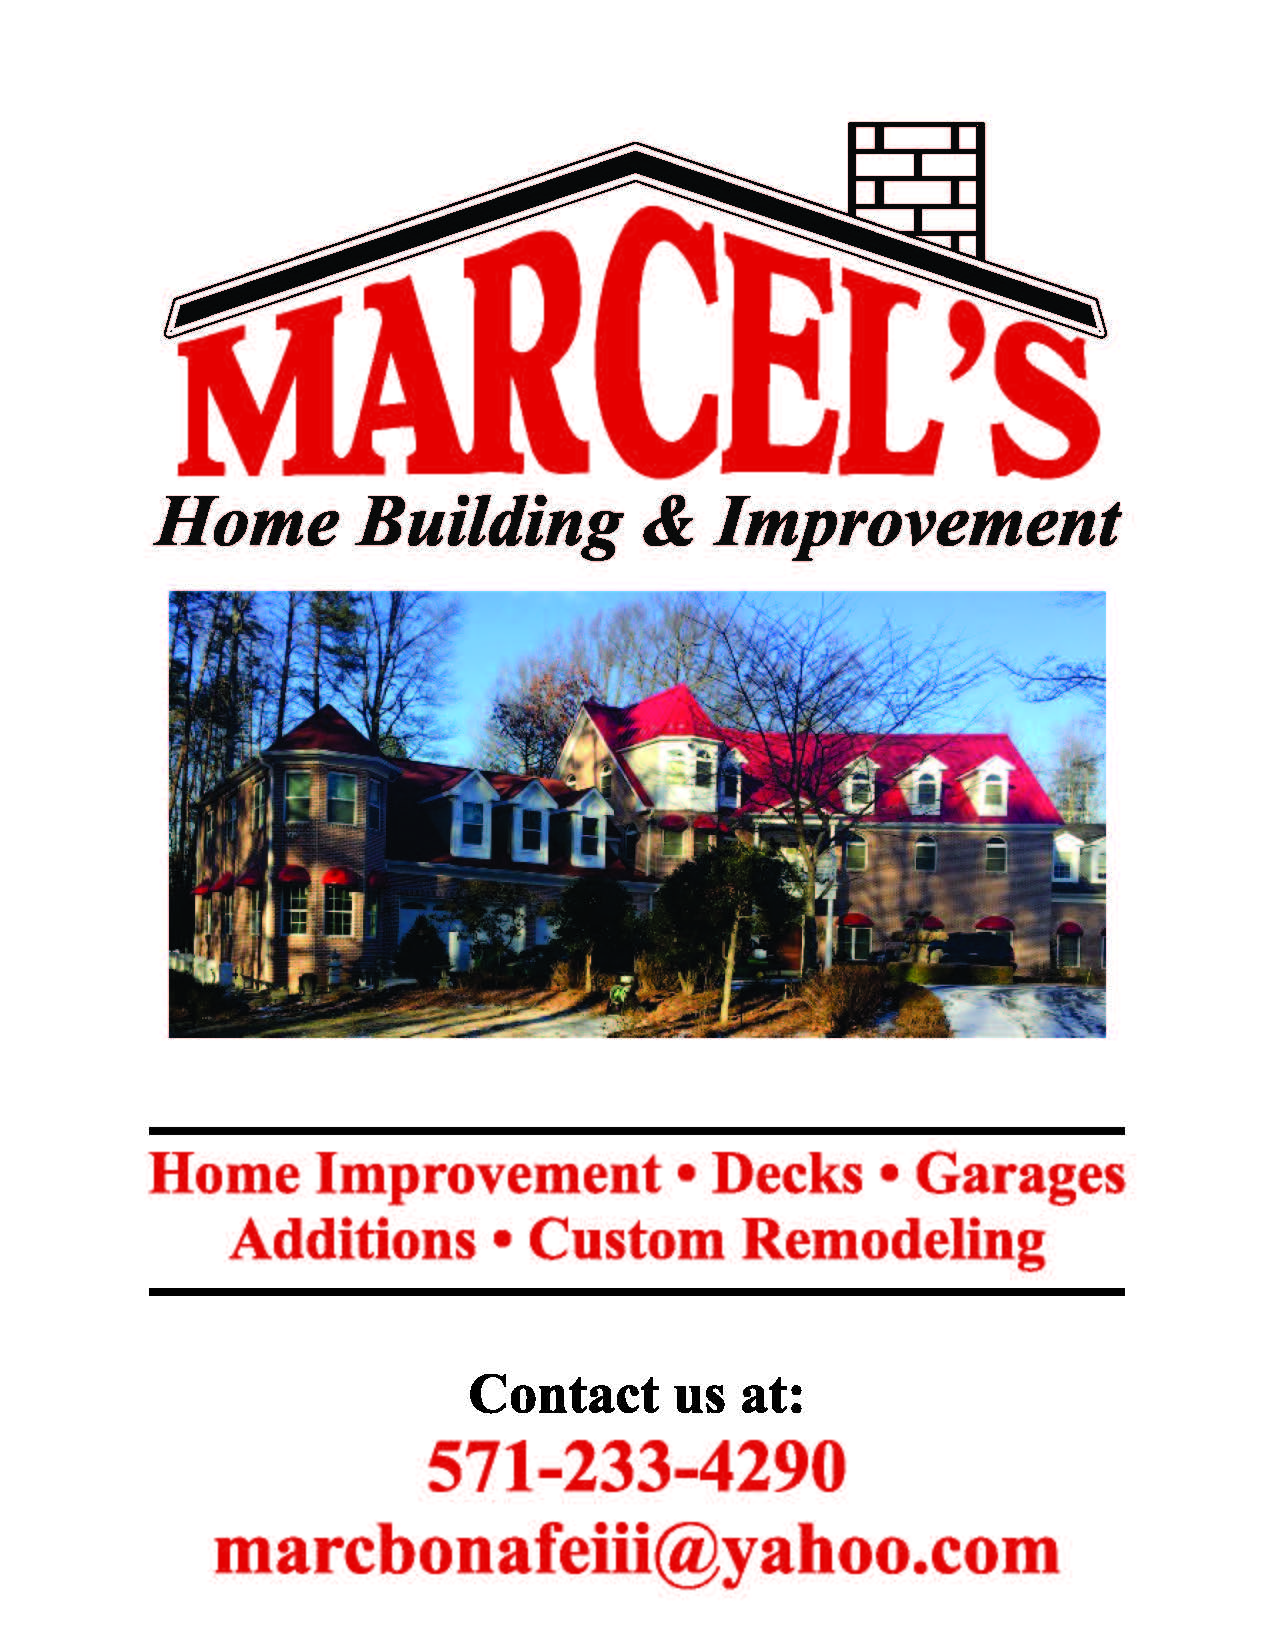 Marcel's Home Building and Improvement